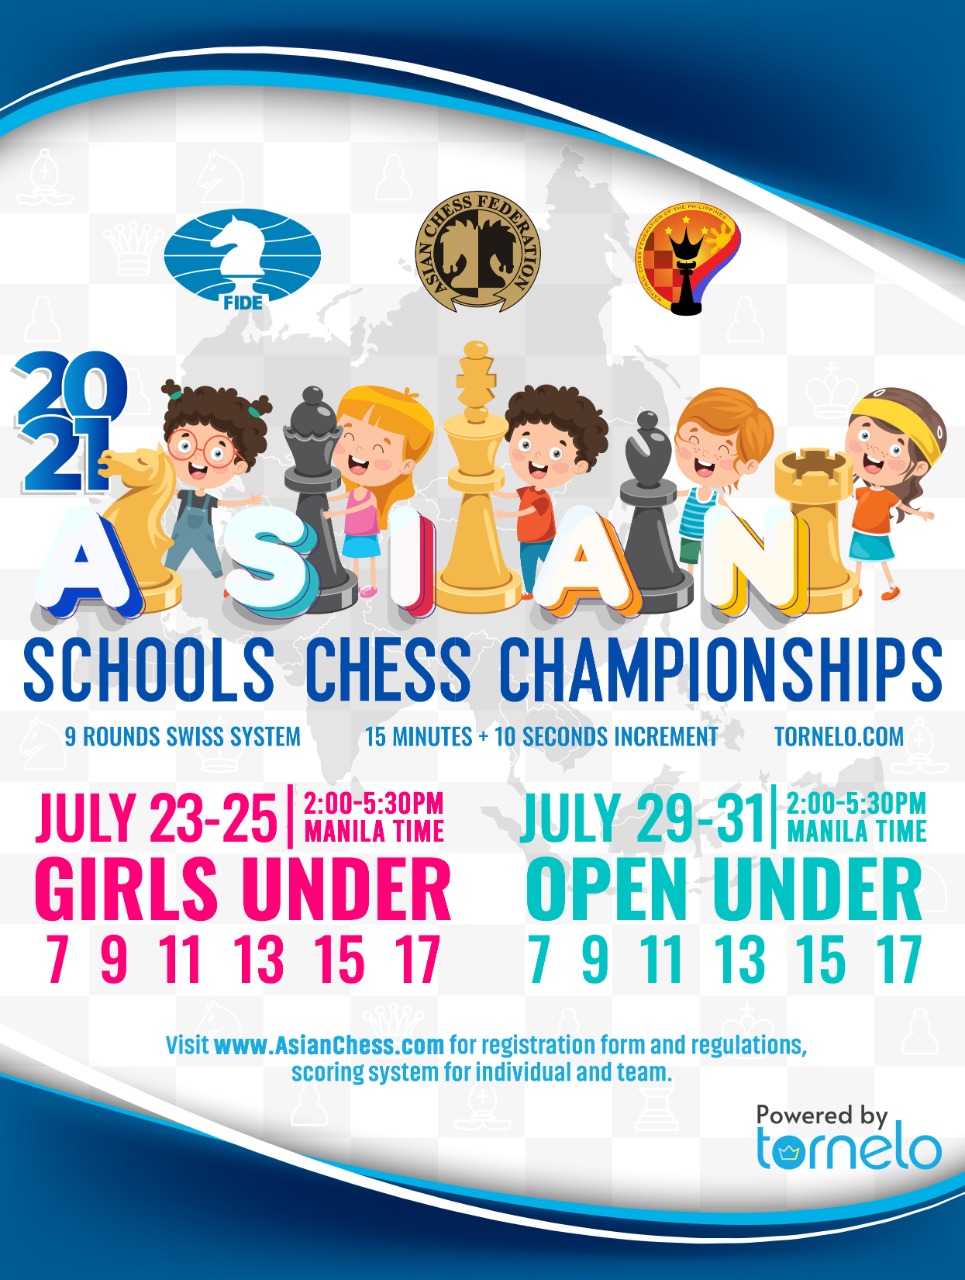 Agami to organize ACG FIDE Rated School Chess Tournament on Sep 28-30